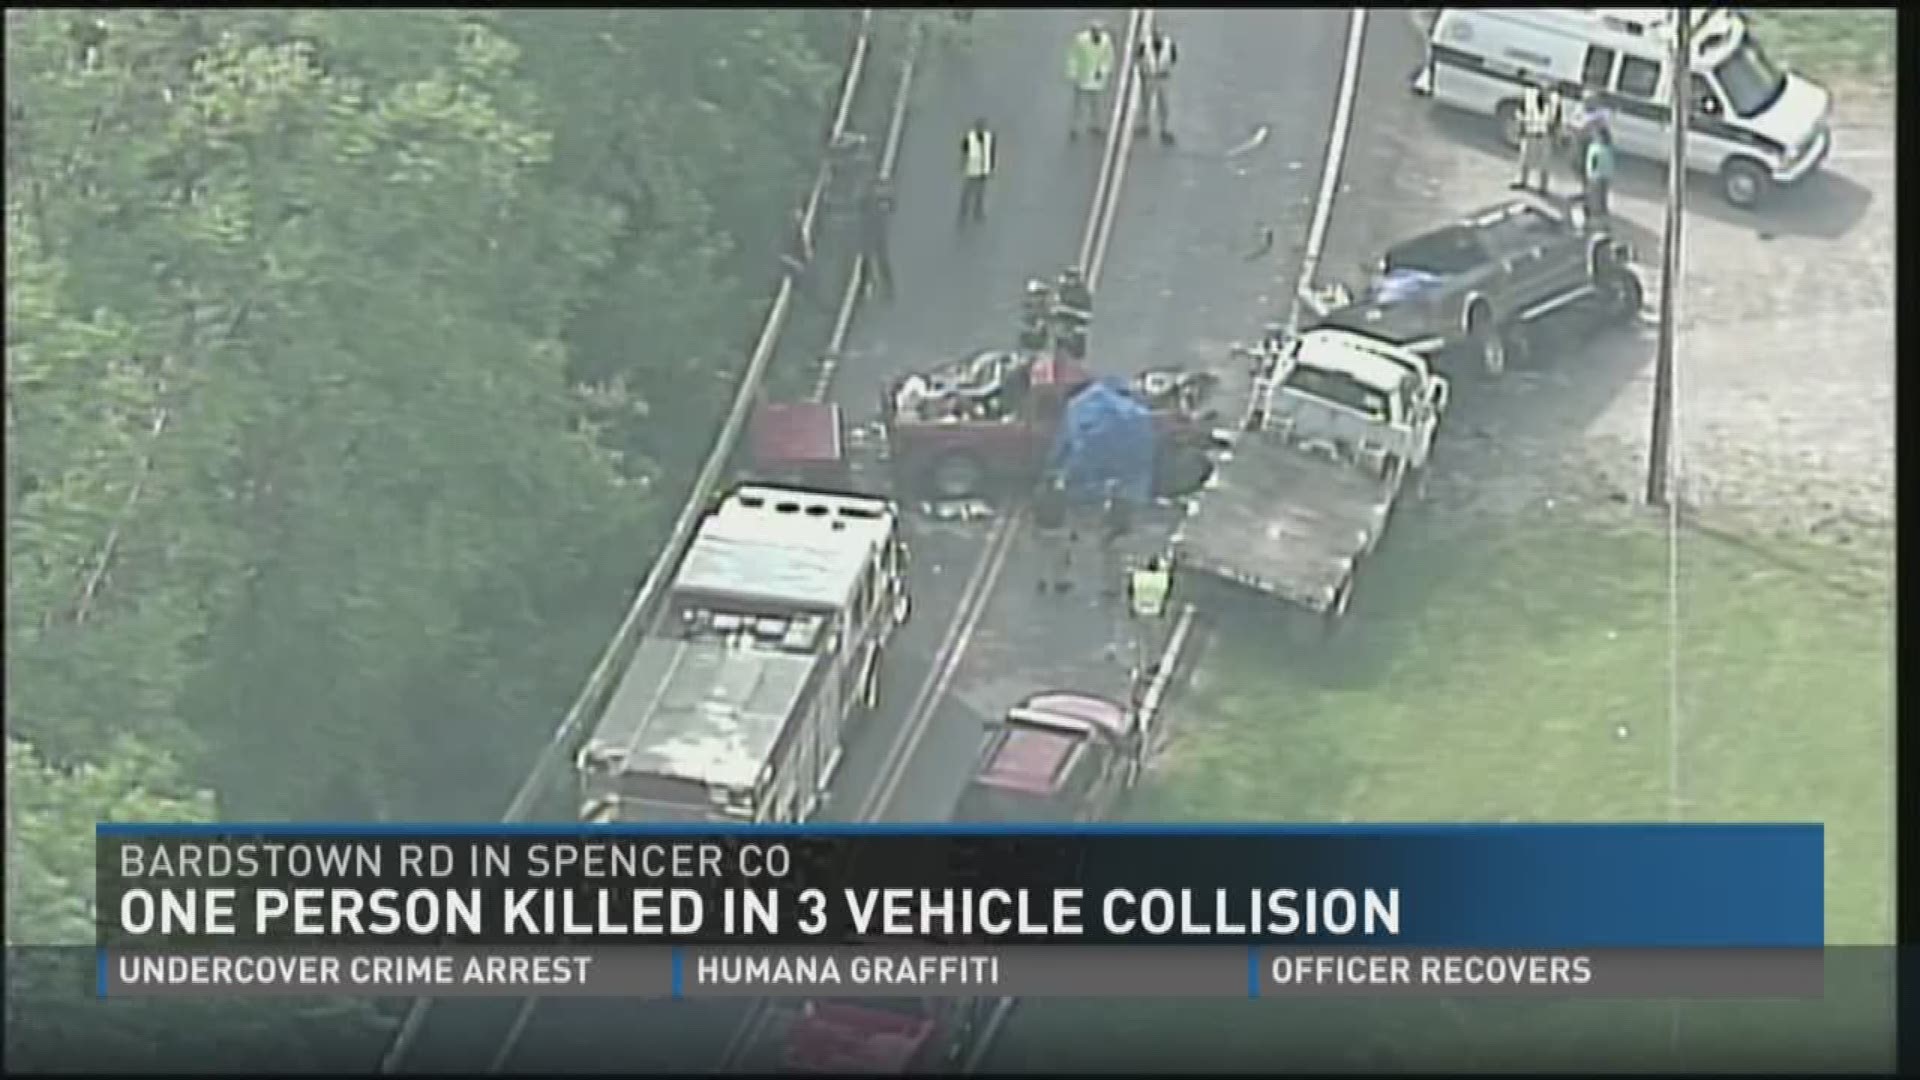 One person killed in 3 vehicle collision